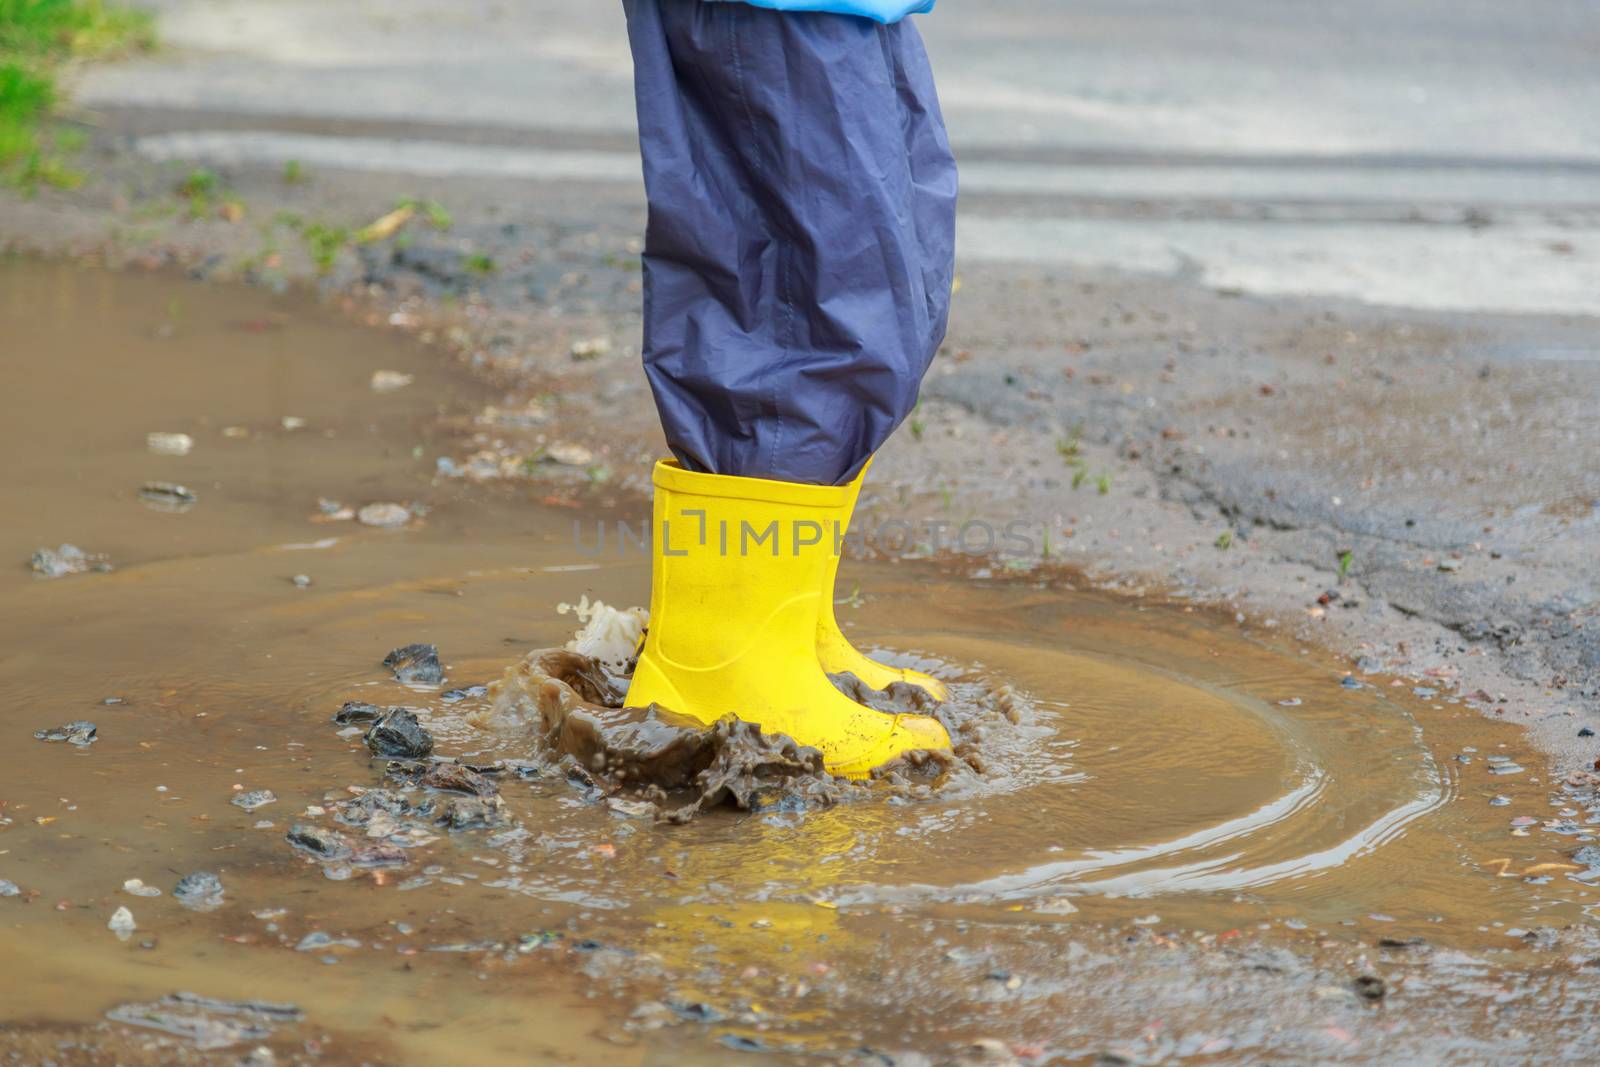 legs of child with yellow rubber boots jump in puddle on a summer walk